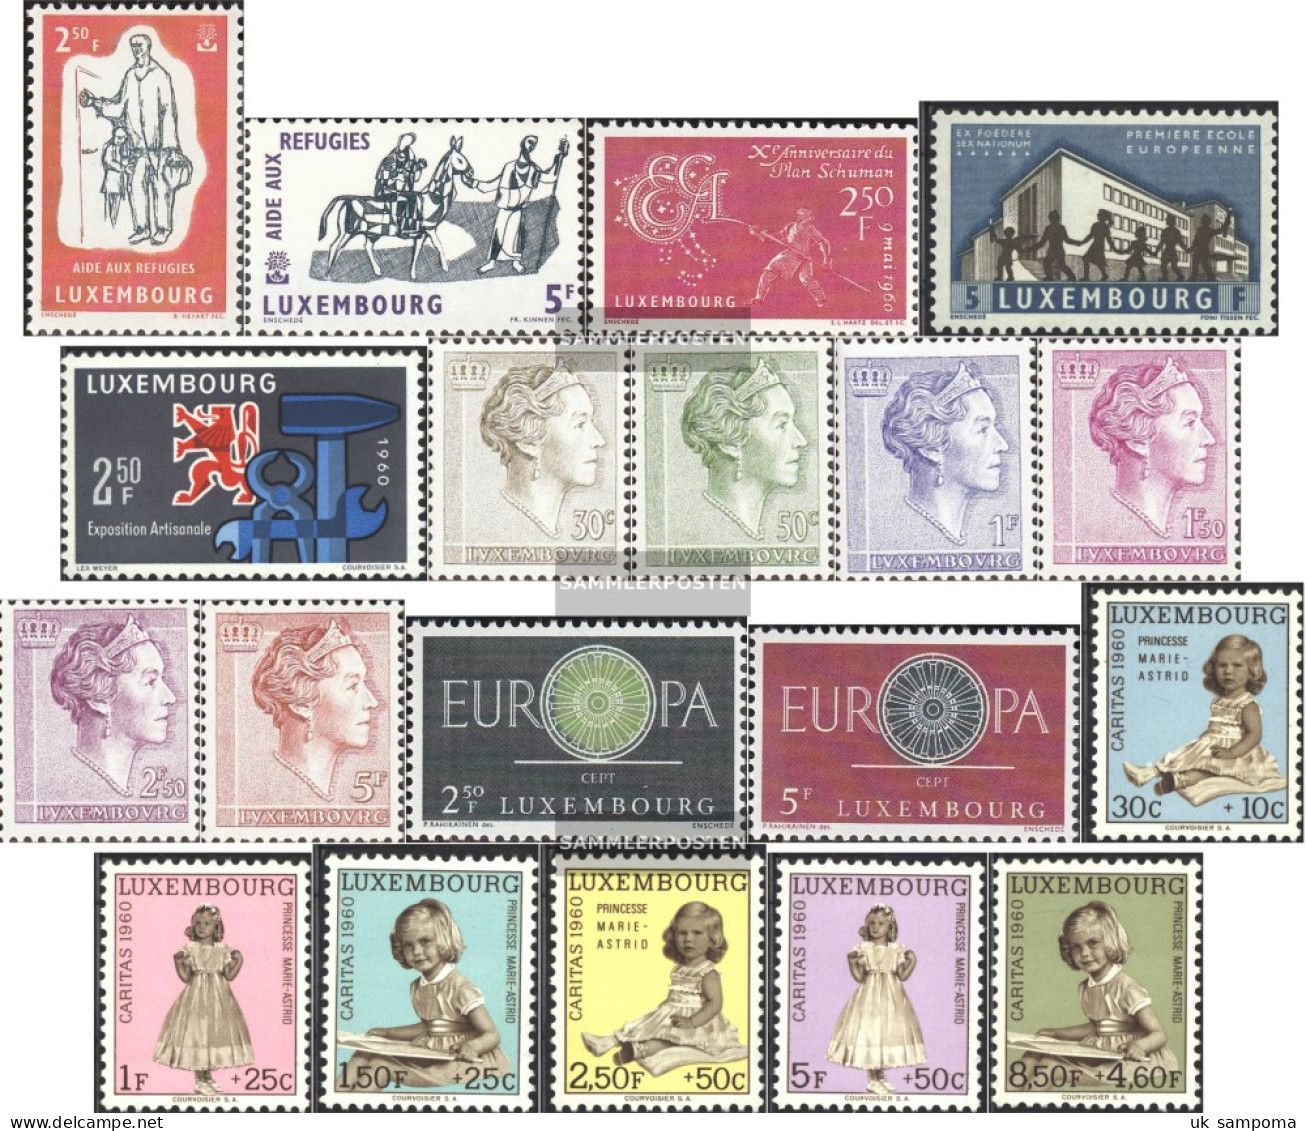 Luxembourg Unmounted Mint / Never Hinged Refugee Years 1960 RefUgee YeArs, CAritAs EUrope U.A - Unused Stamps